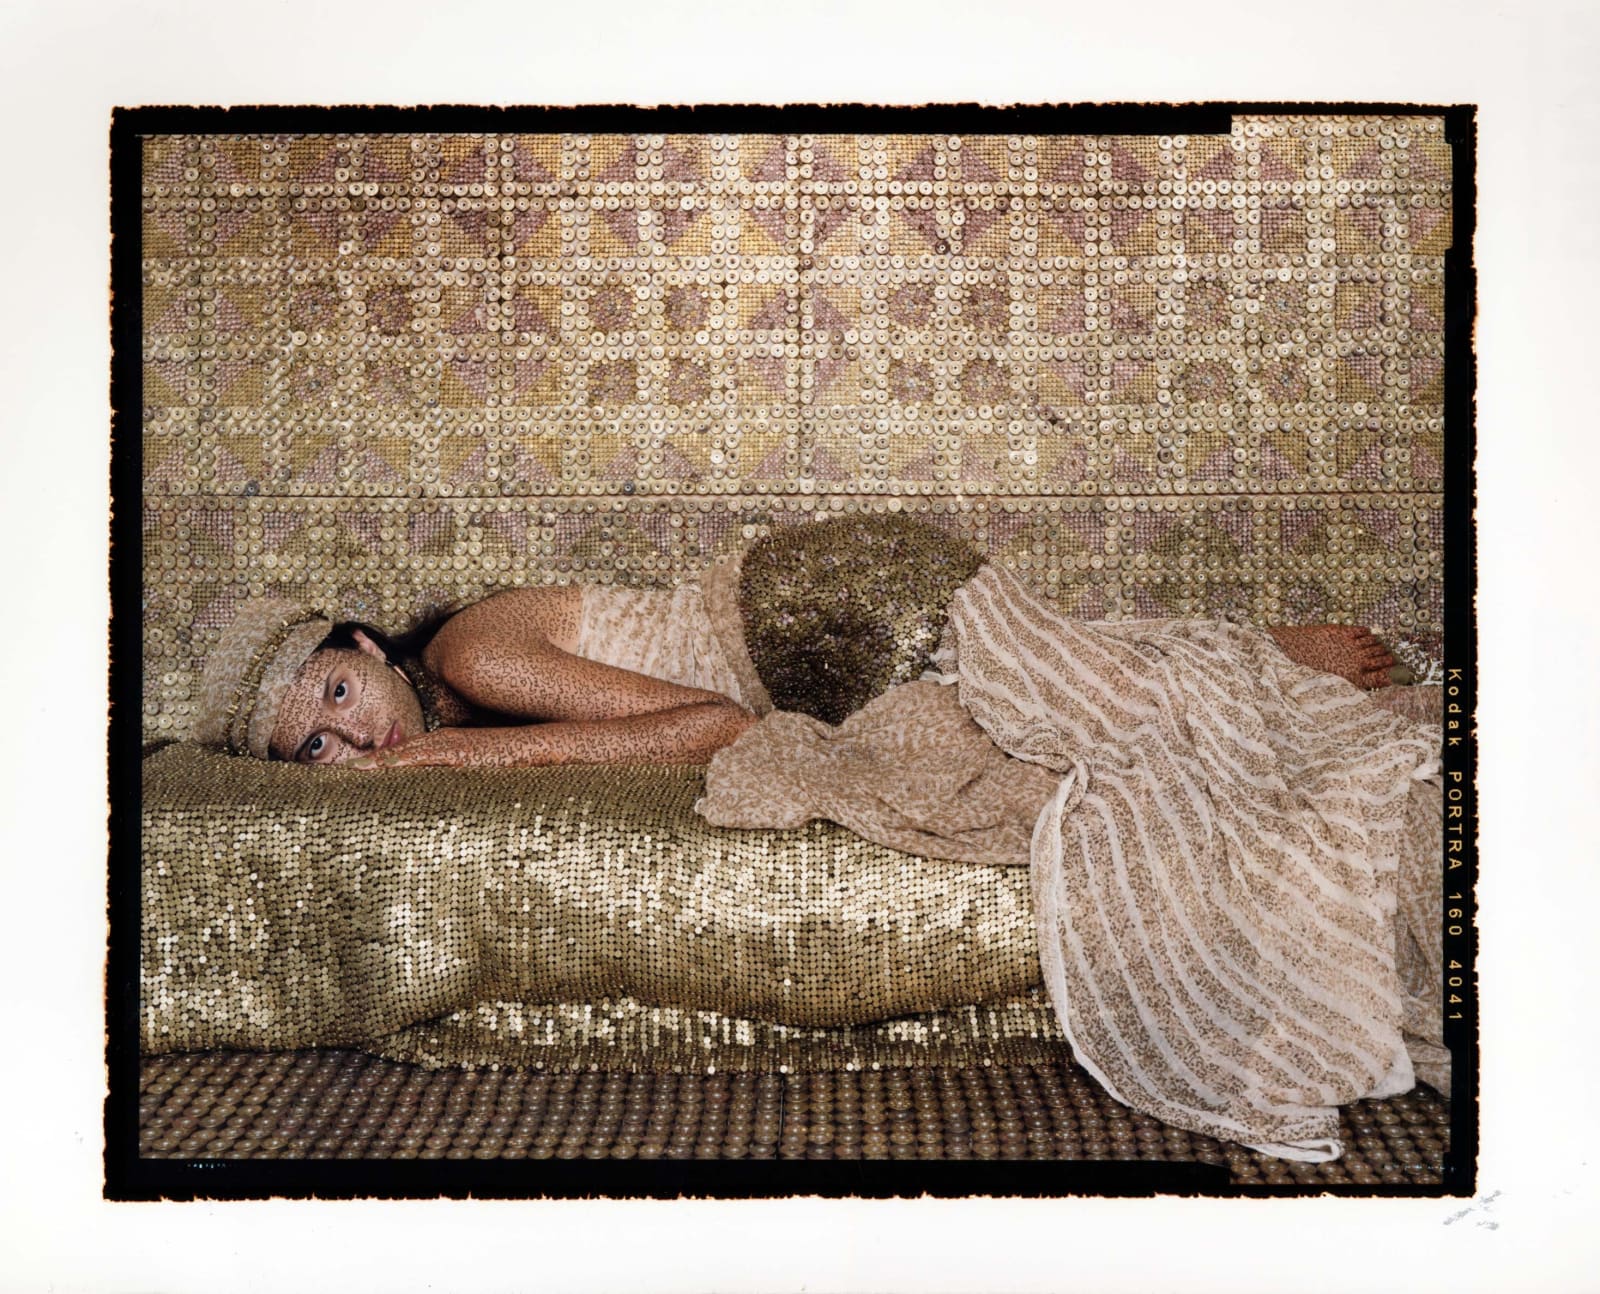 Woman lying on divan with fabrics made of golden bullets, by Lalla Essaydi